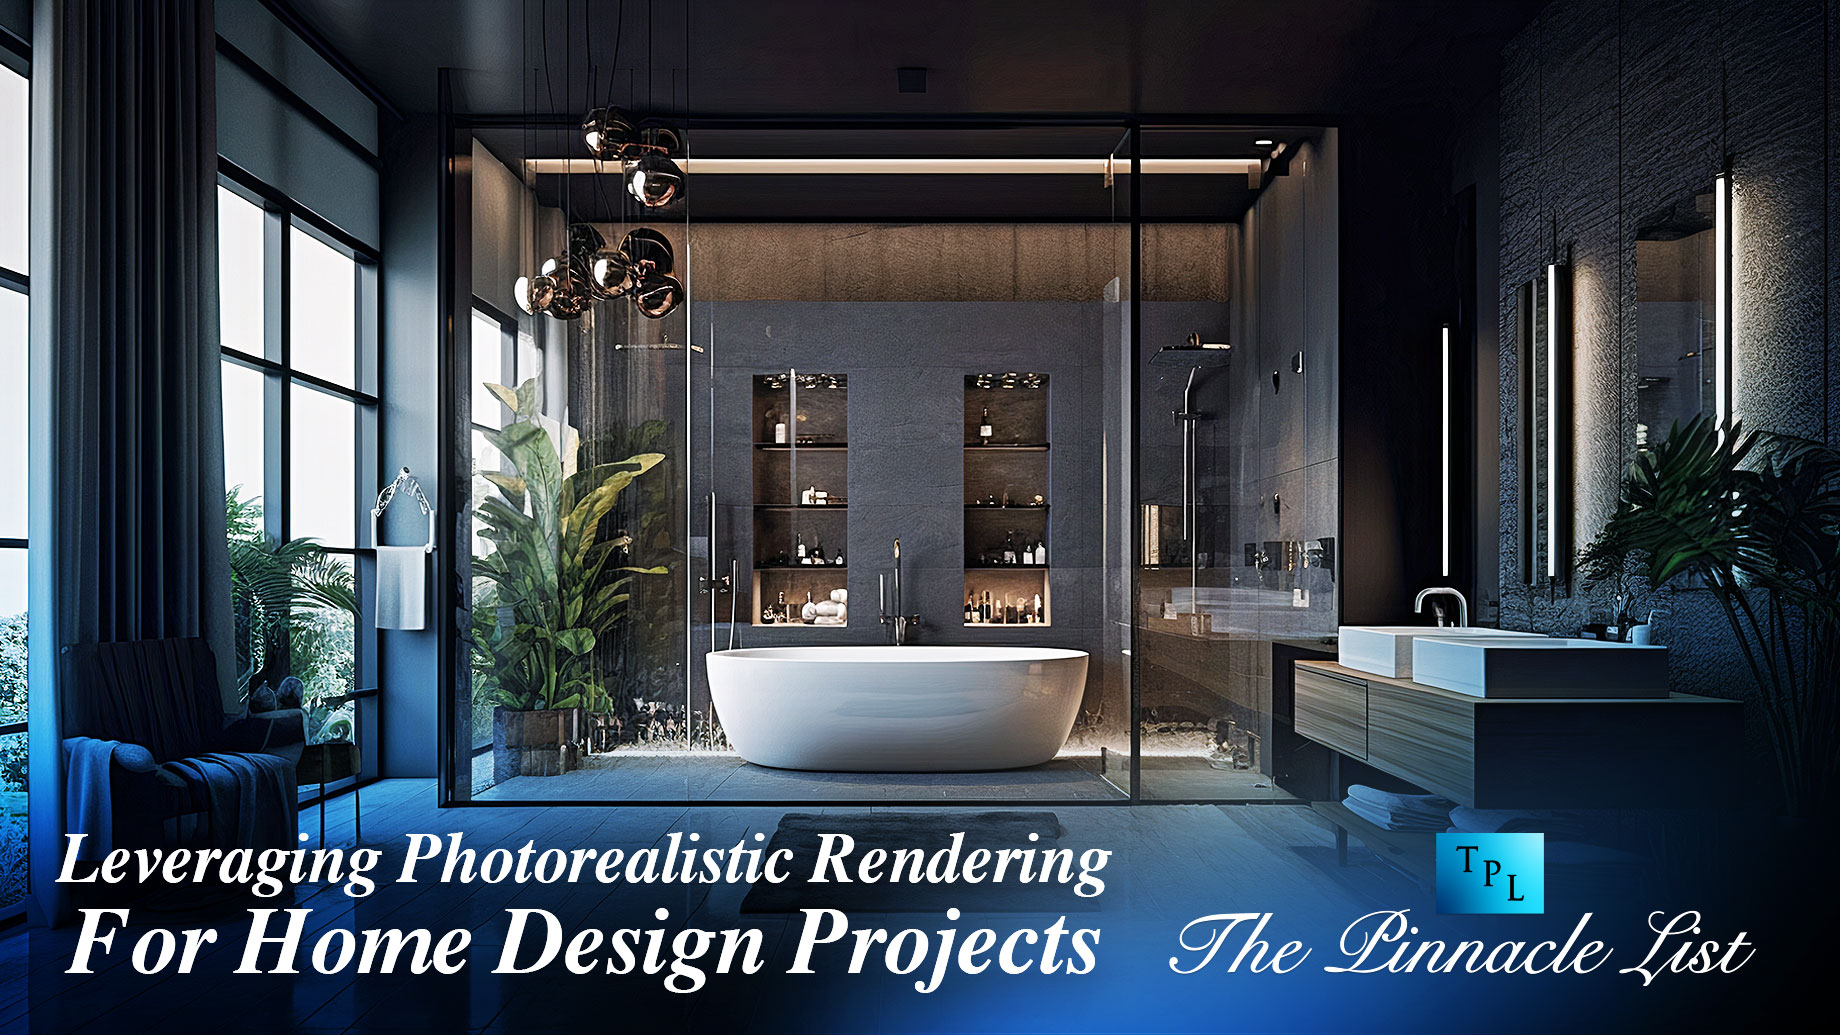 Leveraging Photorealistic Rendering For Home Design Projects